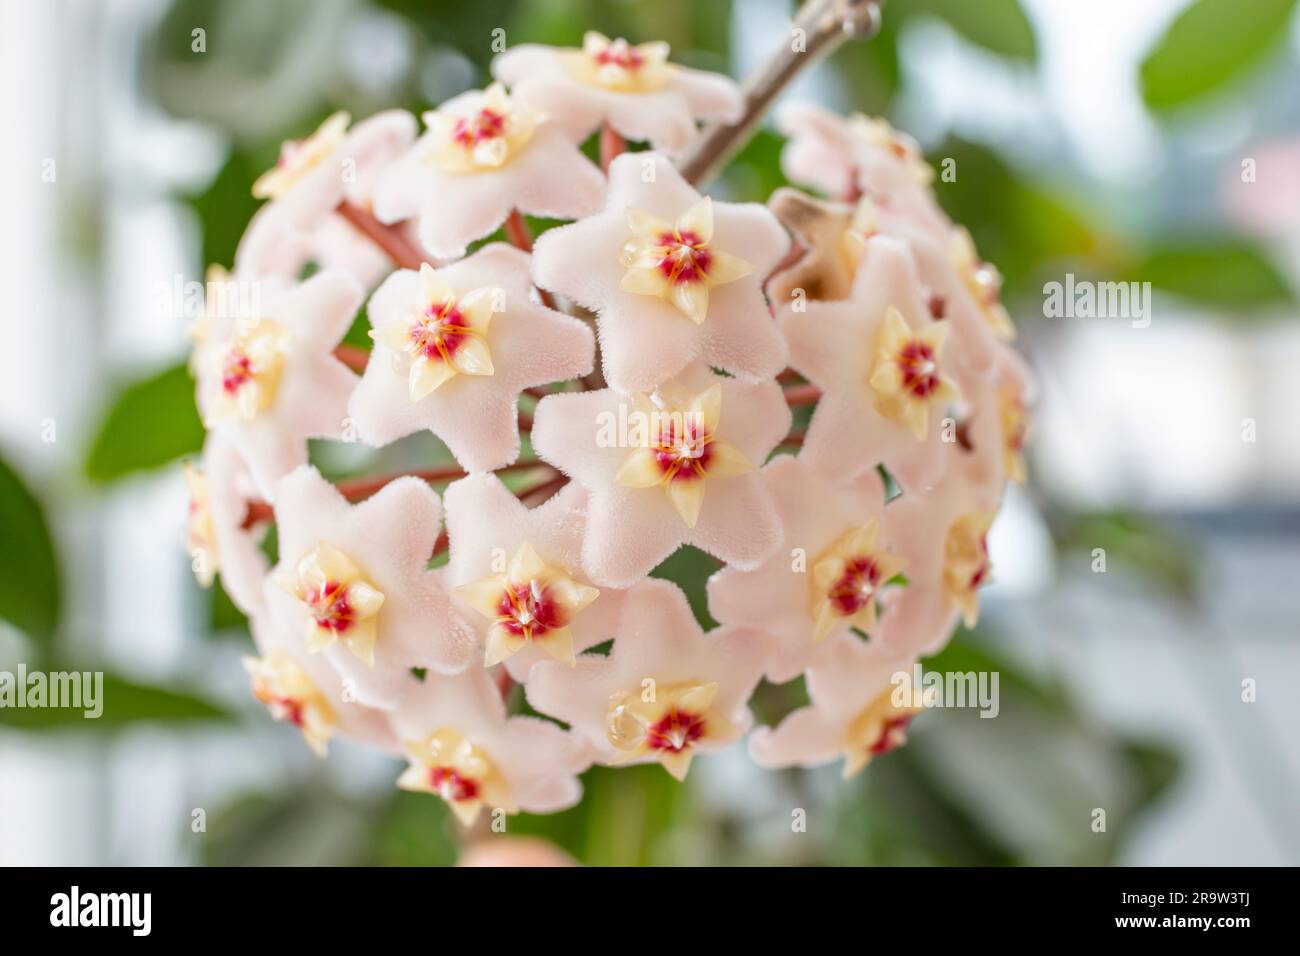 Hoya carnosa,   also known as porcelain flower, soft focus close up Stock Photo